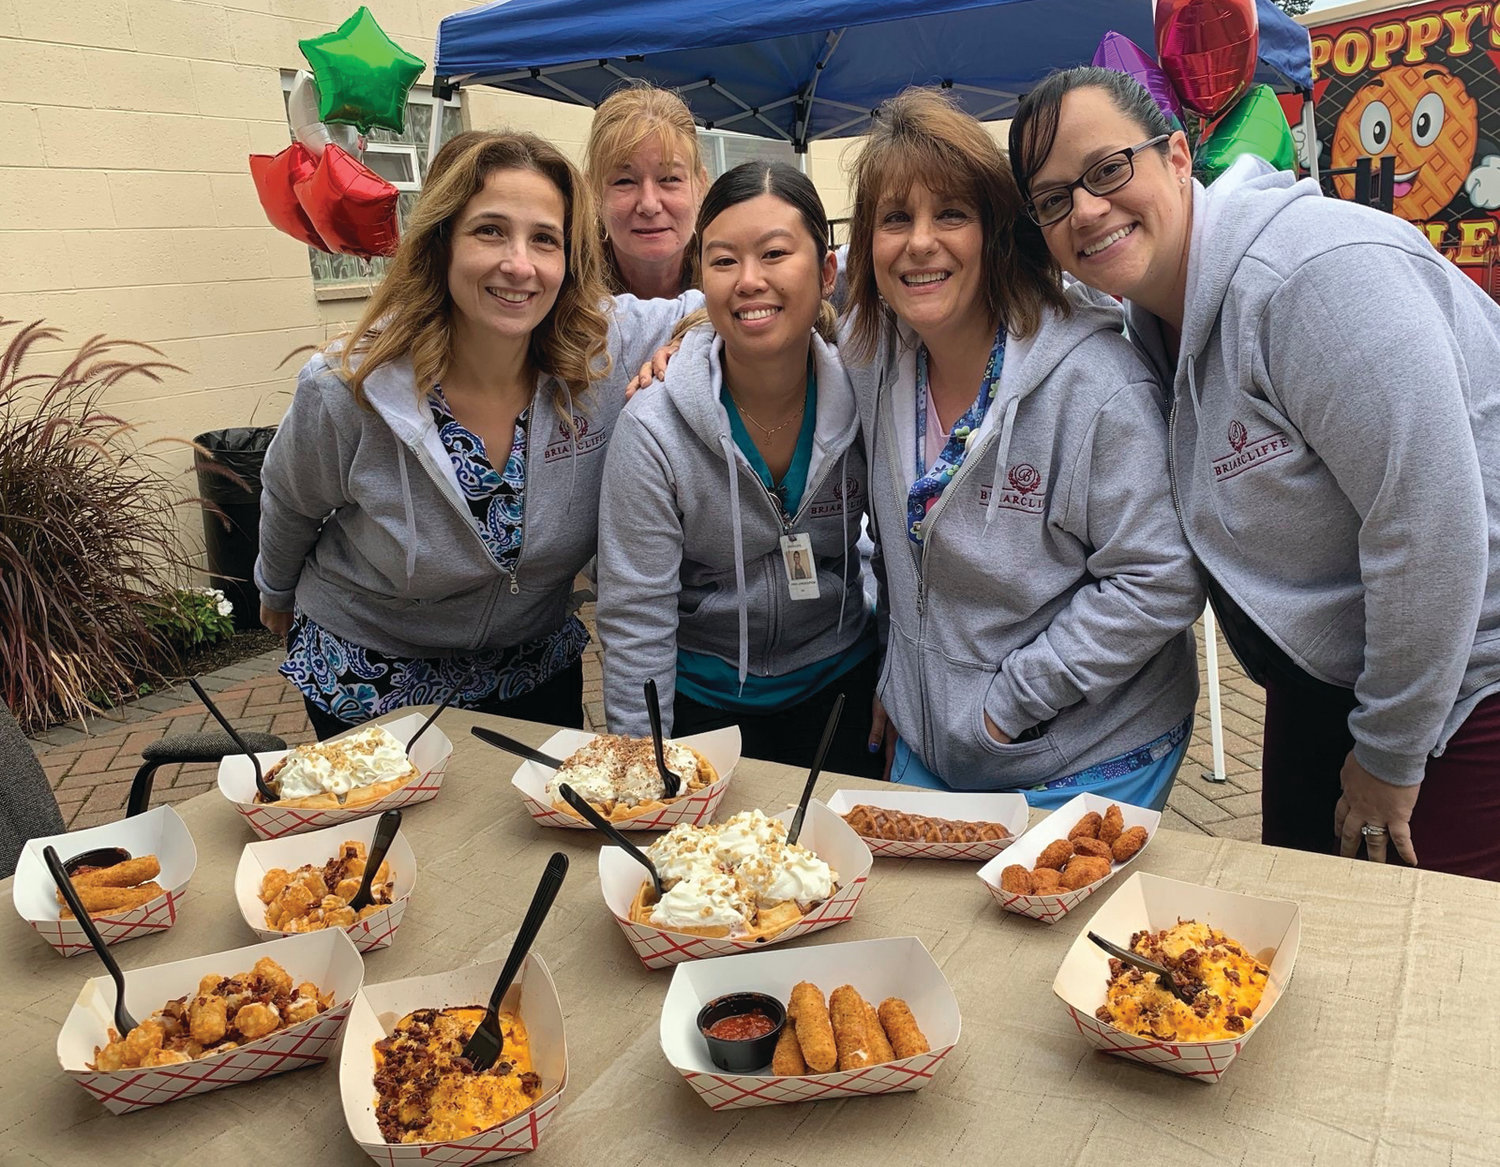 MOUTH-WATERING MUNCHIES: Briarcliffe nurses Jonna Matos, Lorna Parrillo, Linda Laungasoupom, Deborah Petronelli and Beth Brosnahan enjoy a lighter moment in front of the Poppy’s Waffle truck while waiting to sample the many unique foods that were featured during the recent Nurses Appreciation Day Luncheon.